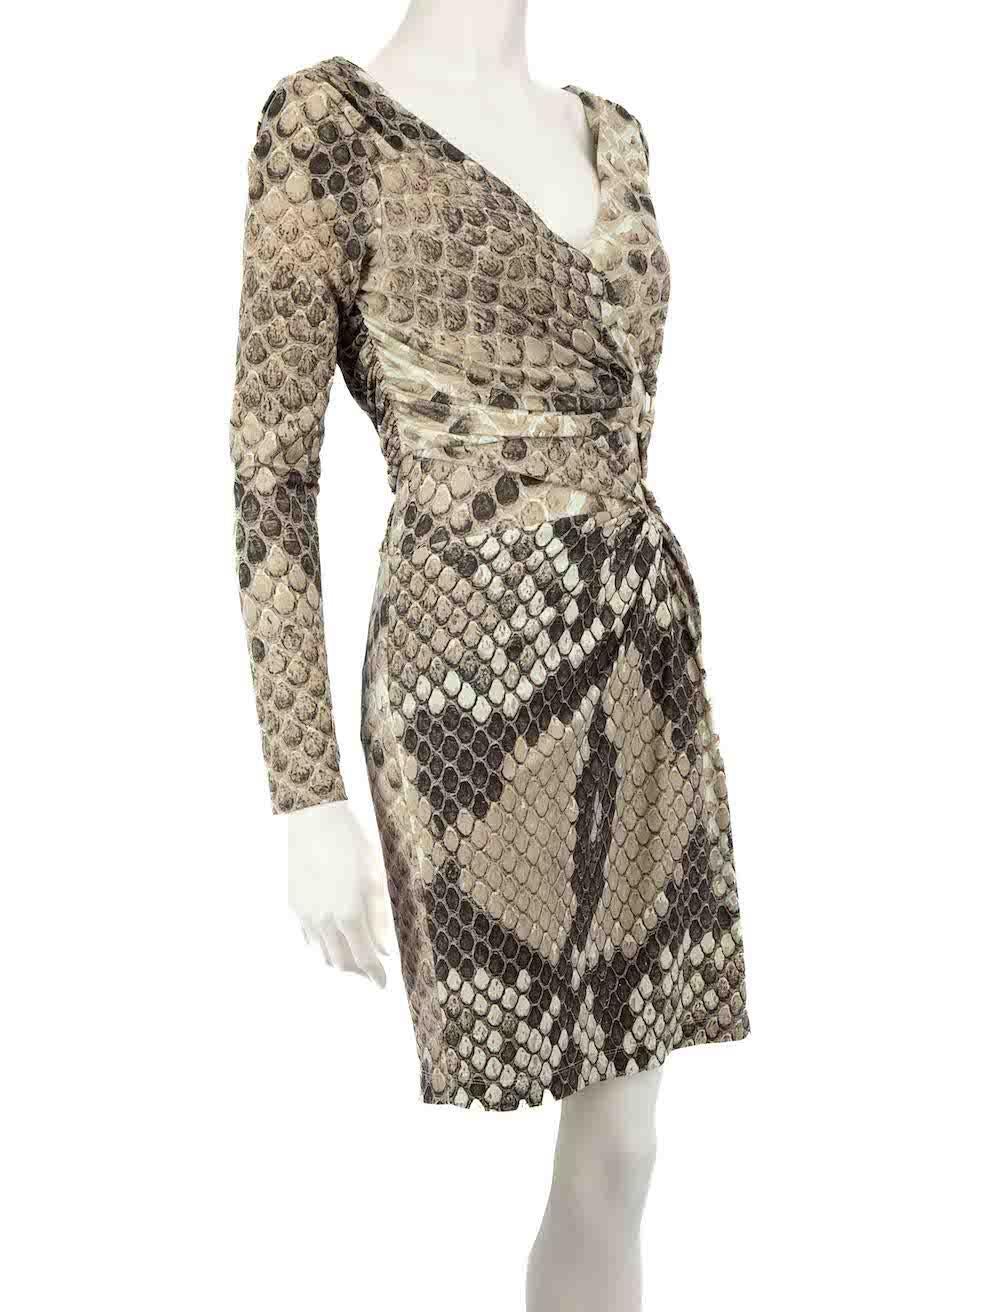 CONDITION is Never worn. No visible wear to dress is evident on this new Roberto Cavallidesigner resale item. 
 
 
 
 Details
 
 
 Beige
 
 Synthetic
 
 Mini dress
 
 Python printed pattern
 
 V neckline
 
 Stretchy
 
 Front ring detail
 
 Internal